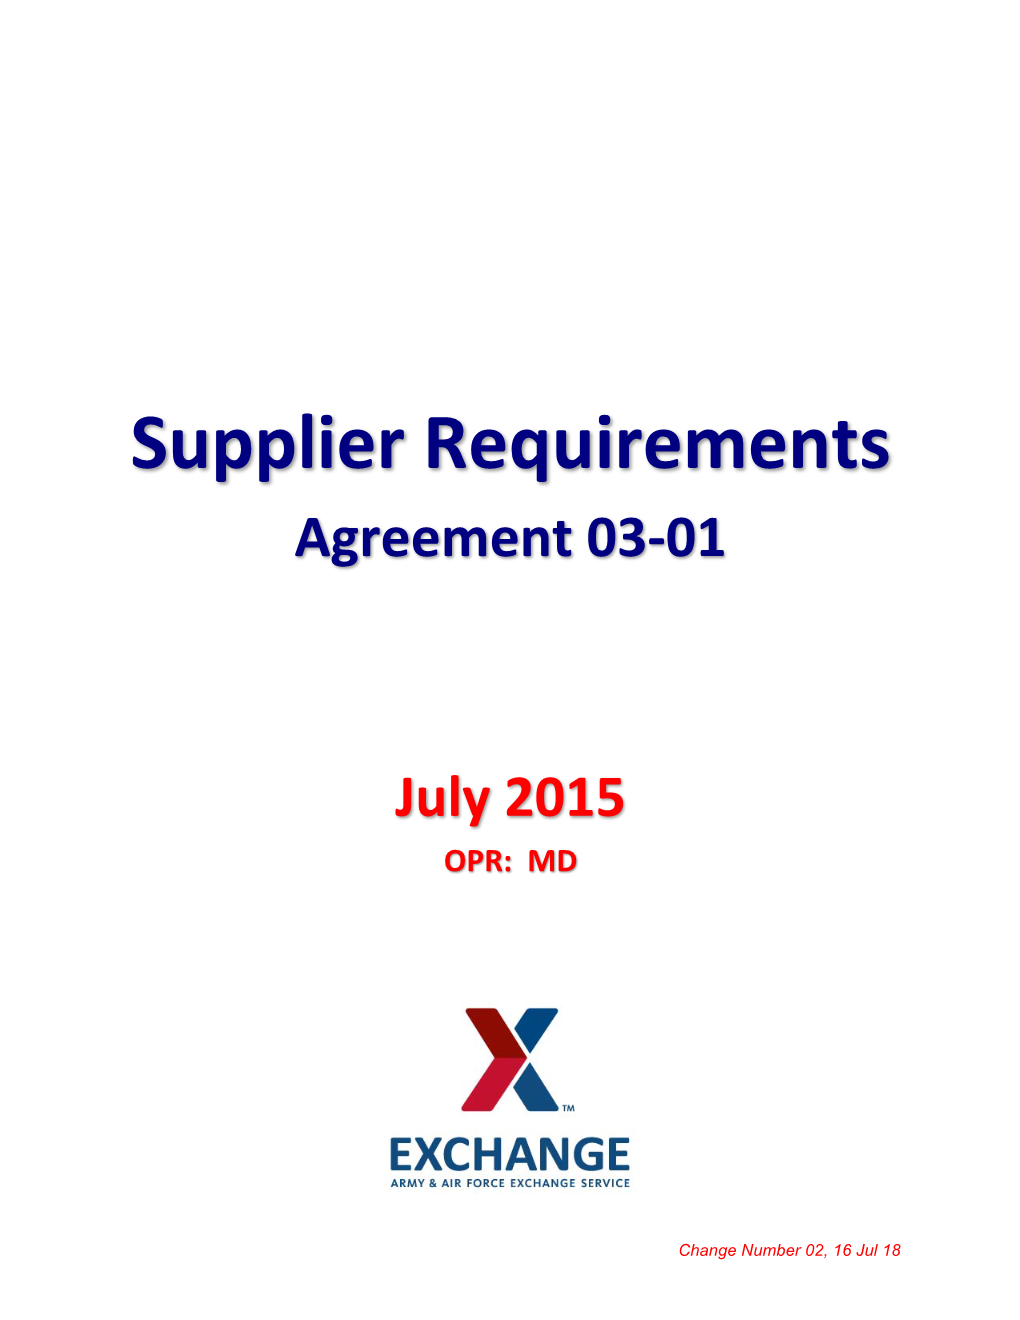 Supplier Requirements Agreement 03-01